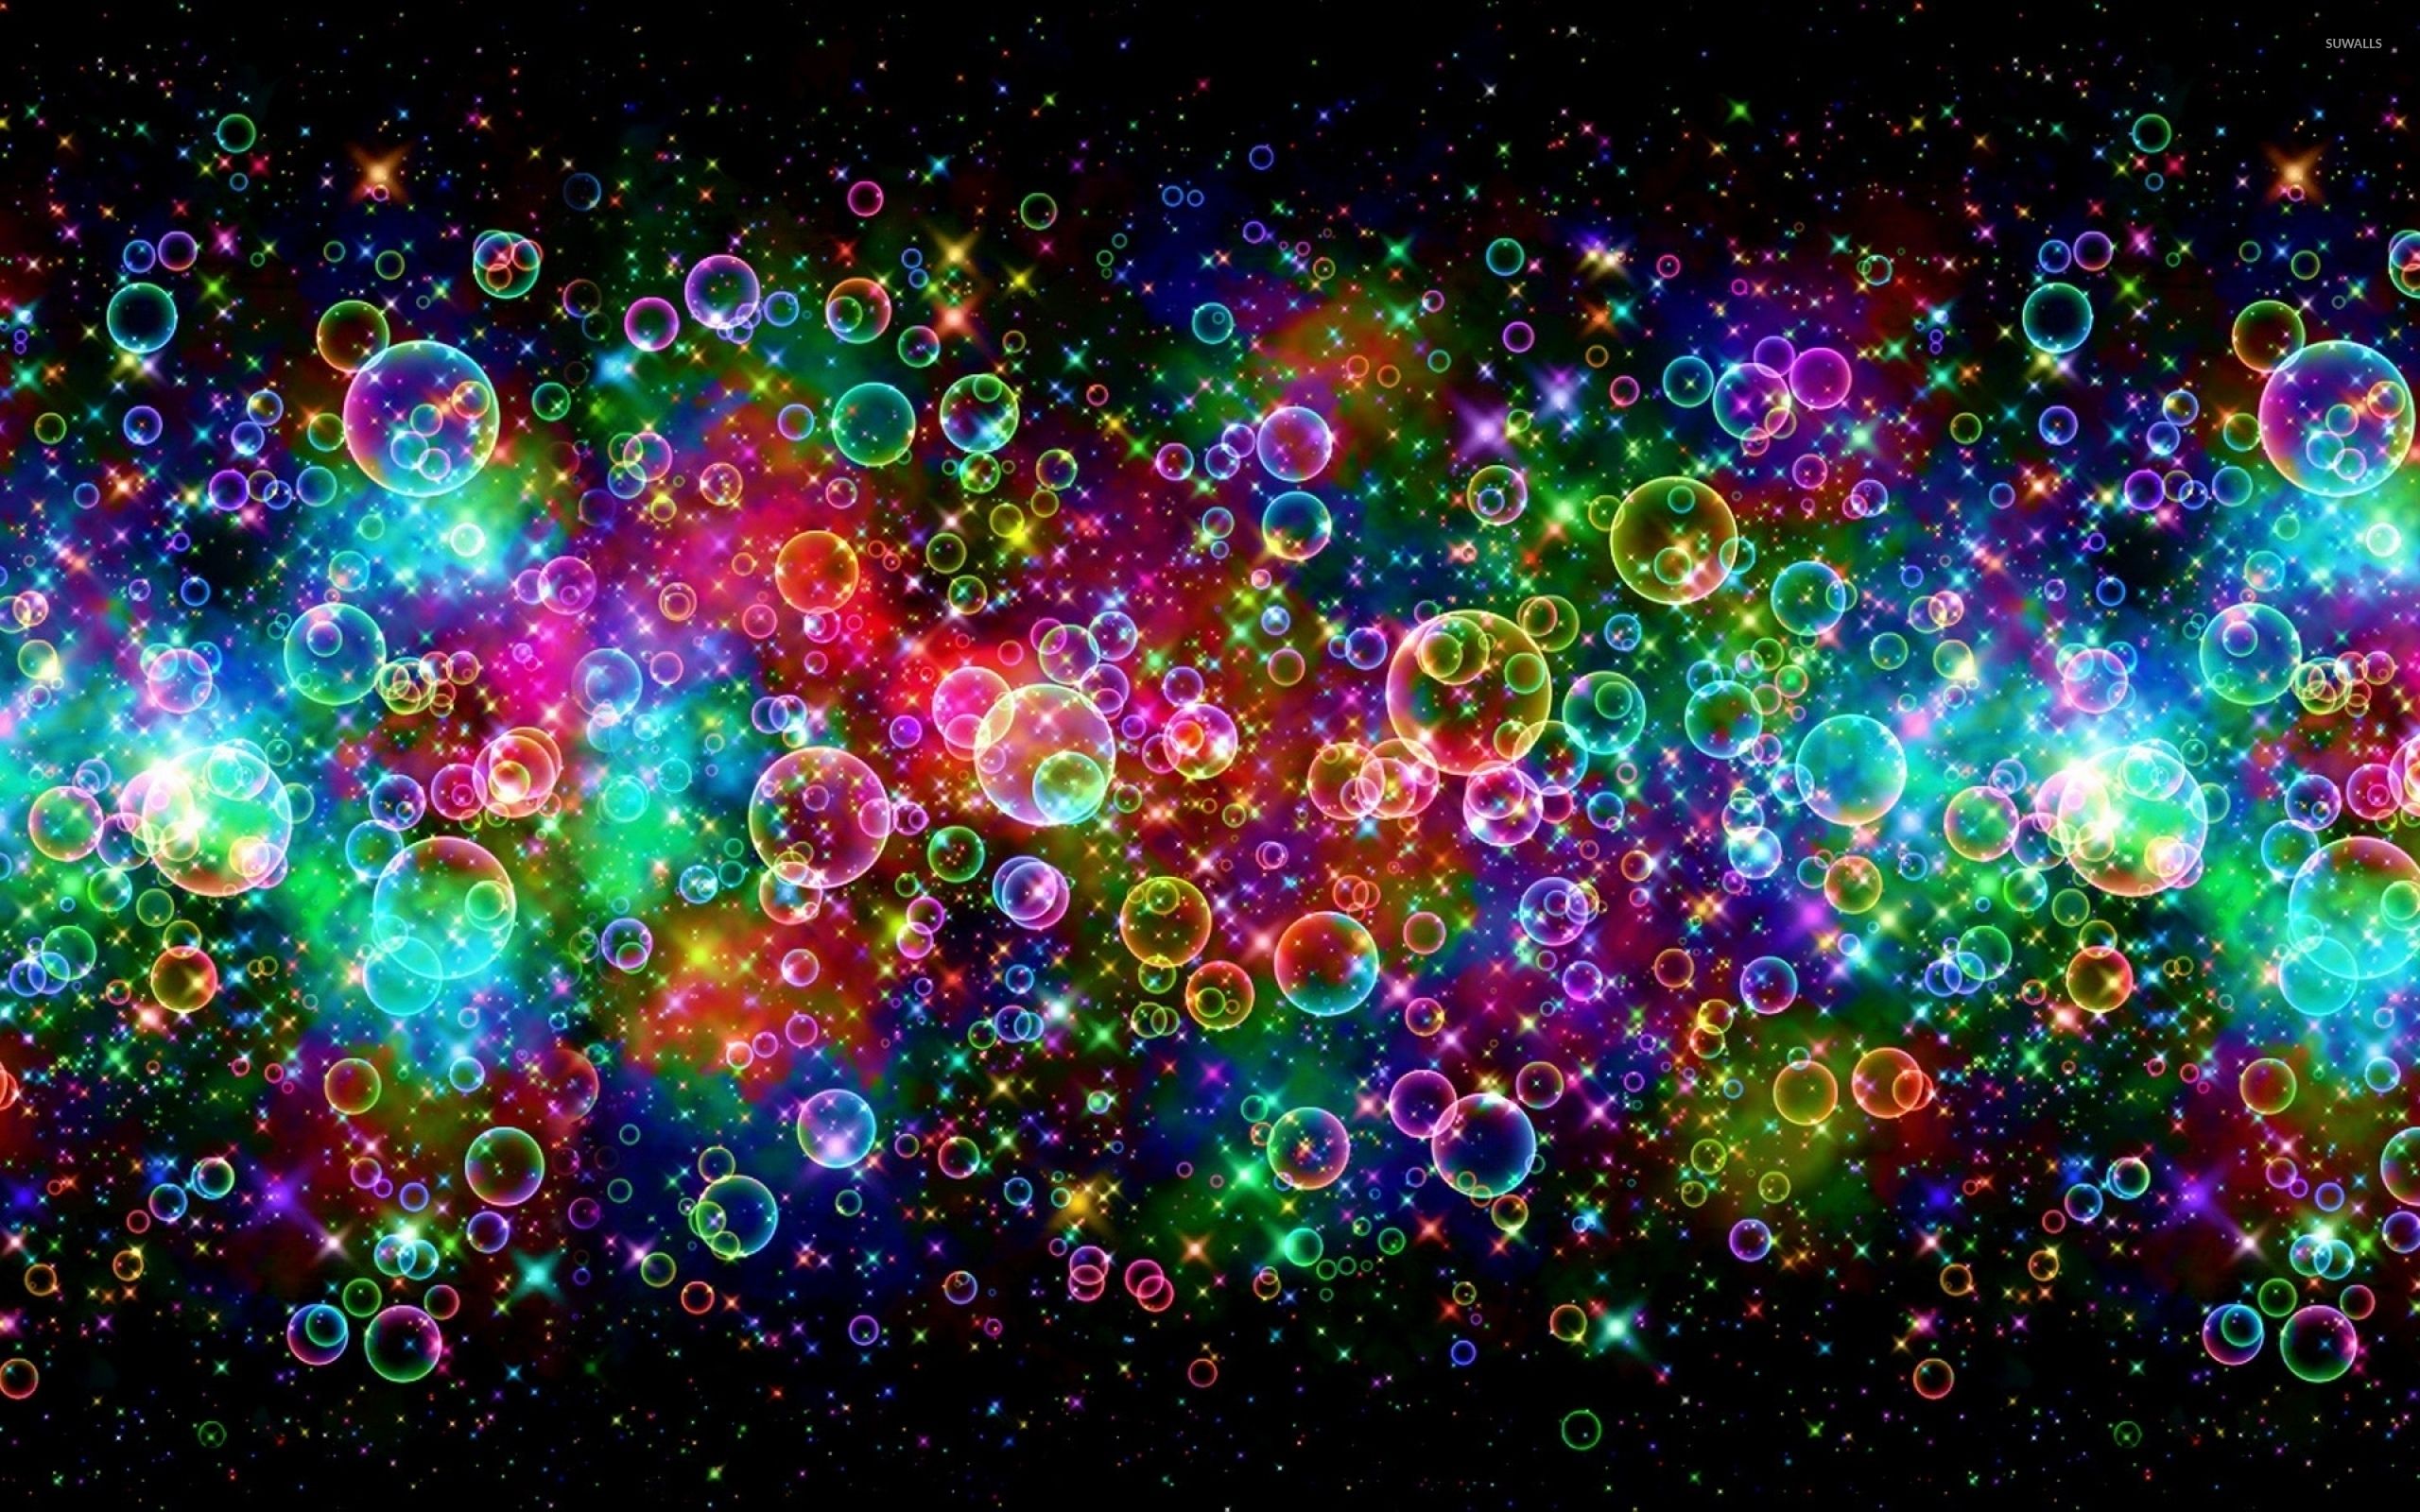 Bright colors reflected on the bubbles wallpaper wallpaper